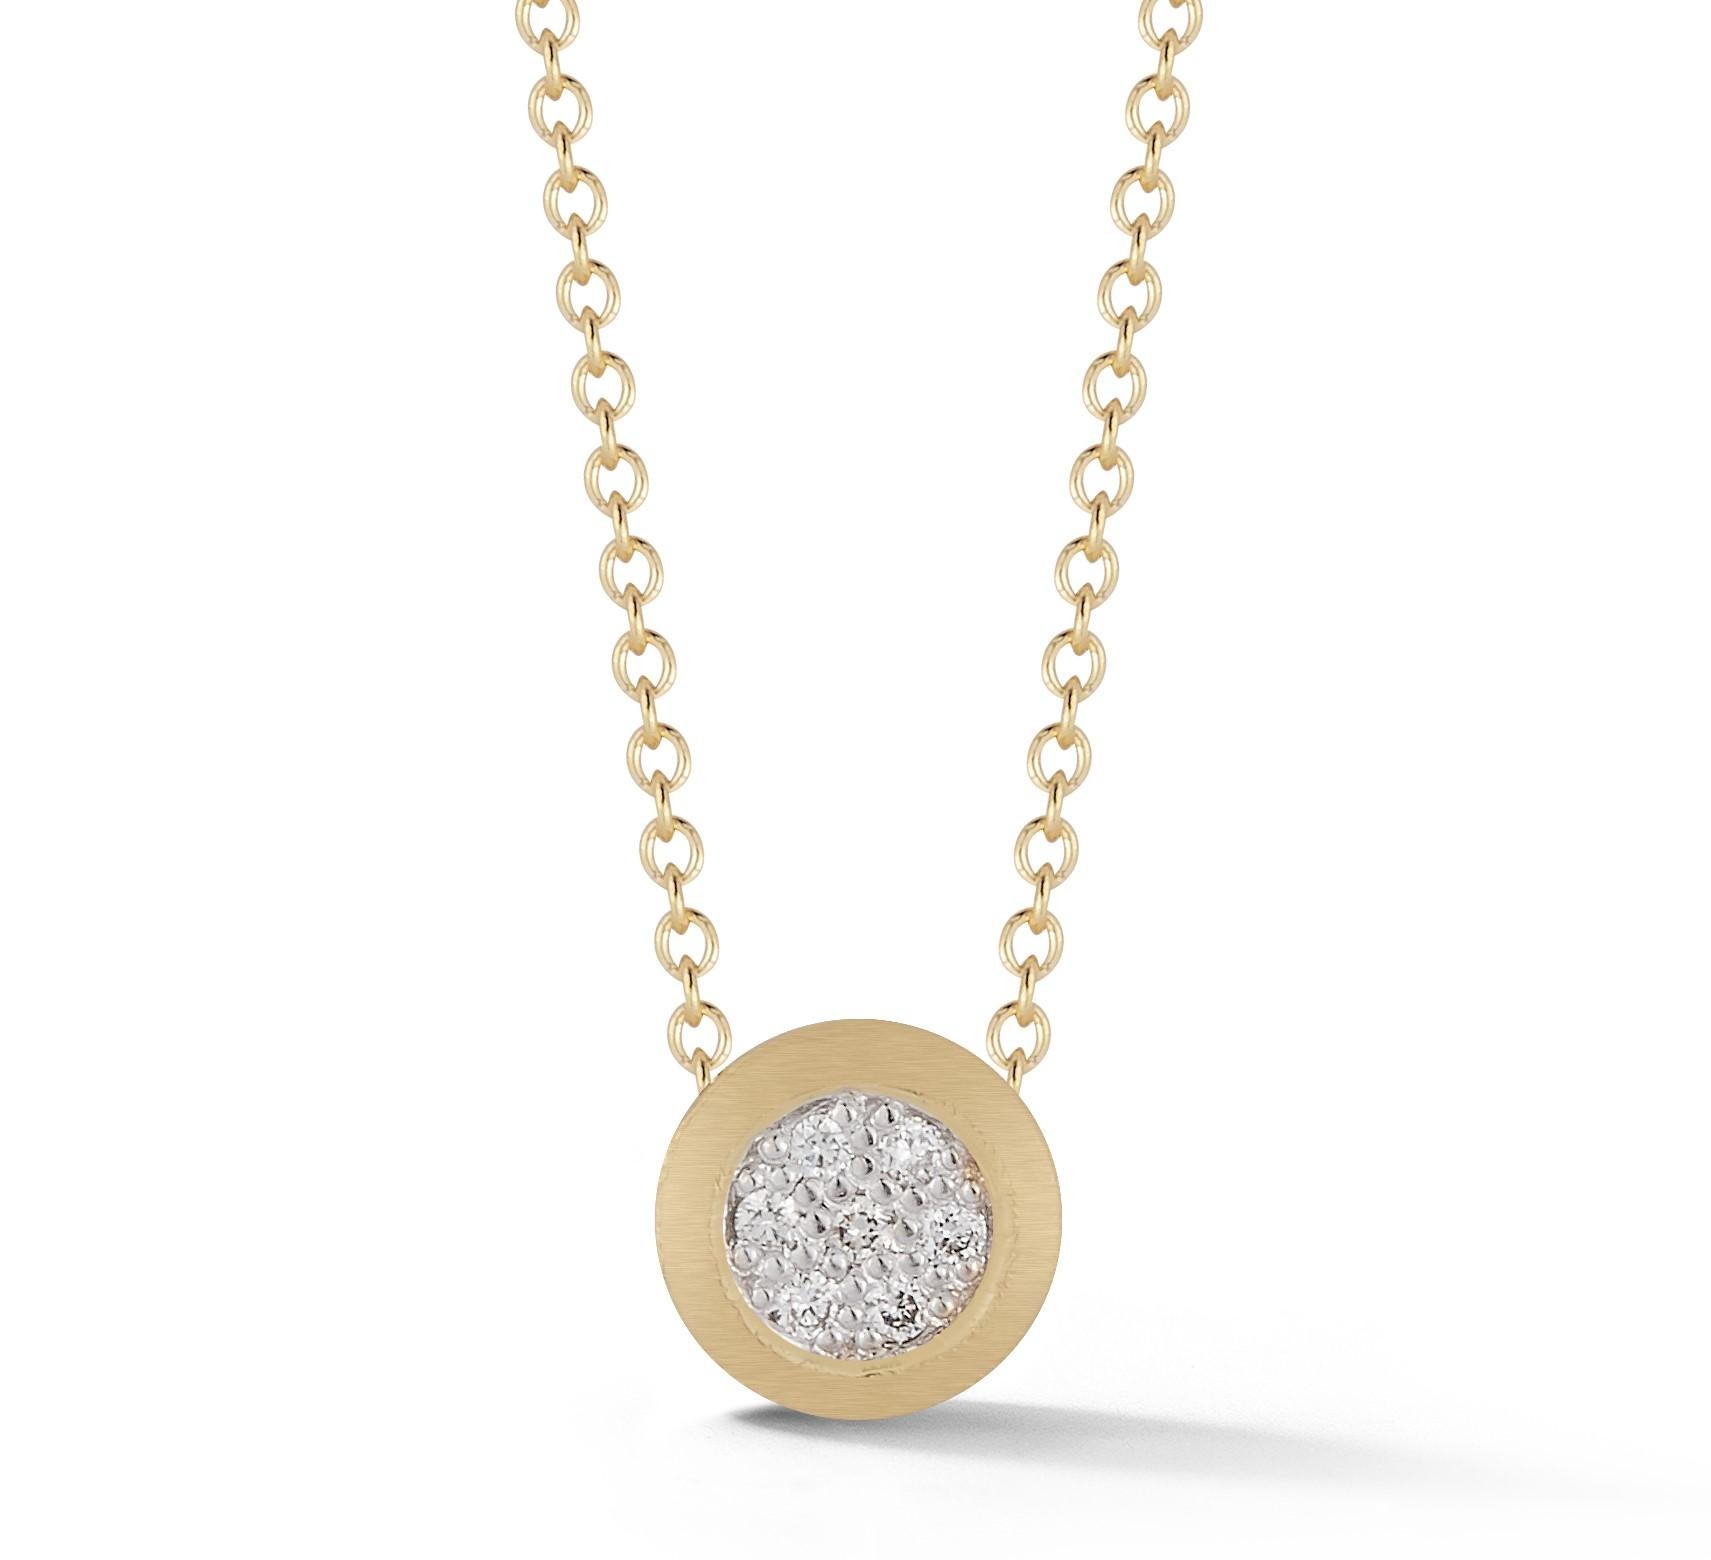 14 Karat Yellow Gold Hand-Crafted Matte-Finished 7.3mm Round Pendant, Centered with 0.06 Carats of Pave Set Diamonds.
